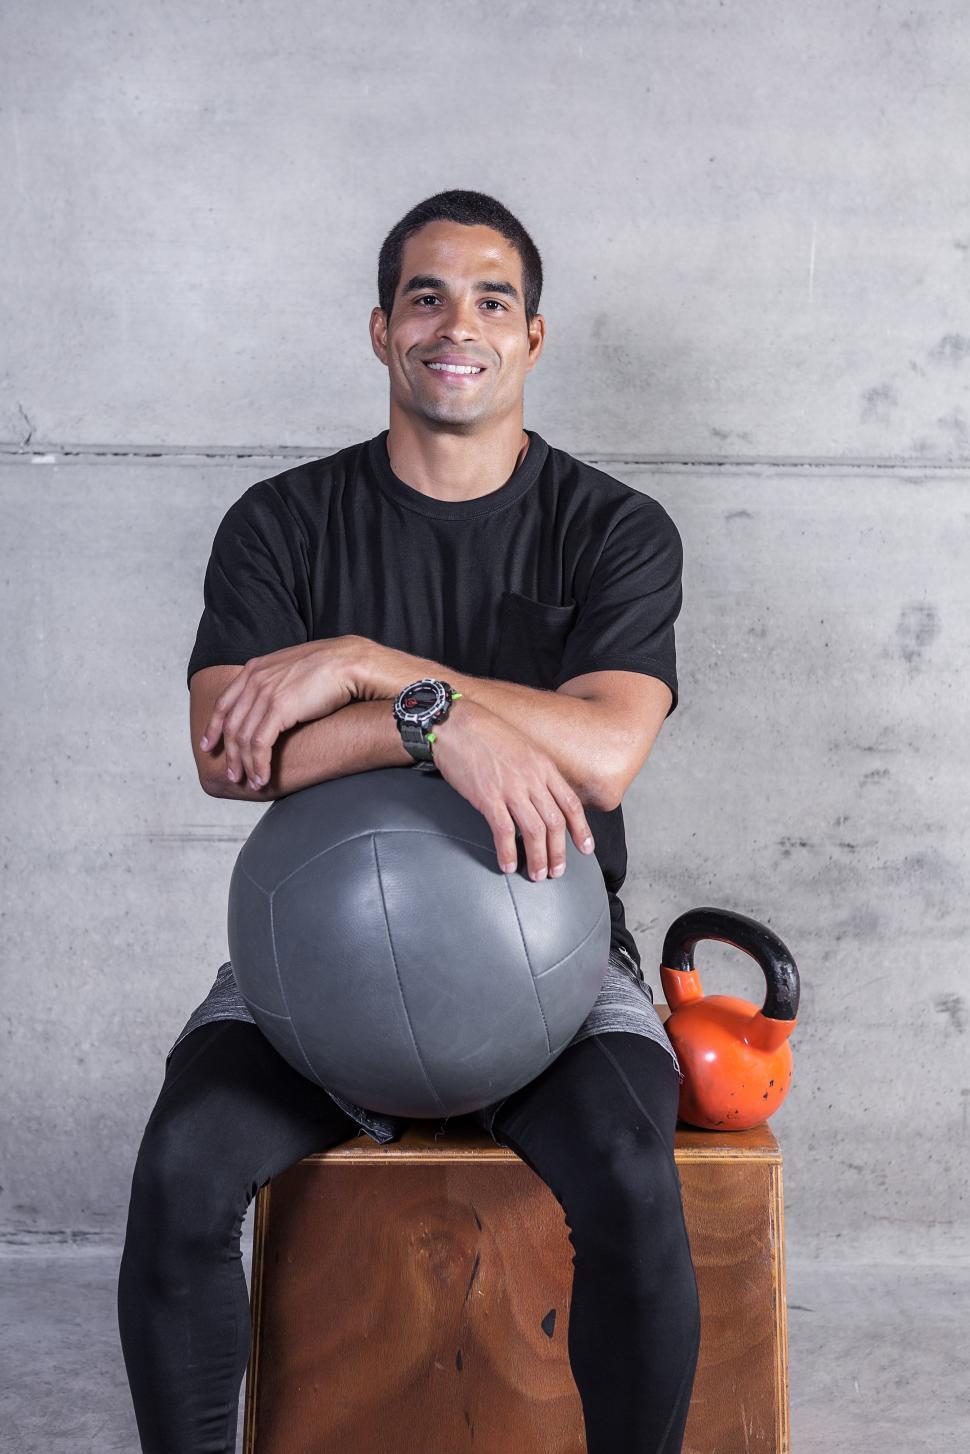 Free Image of Smiling athletic man with equipment 